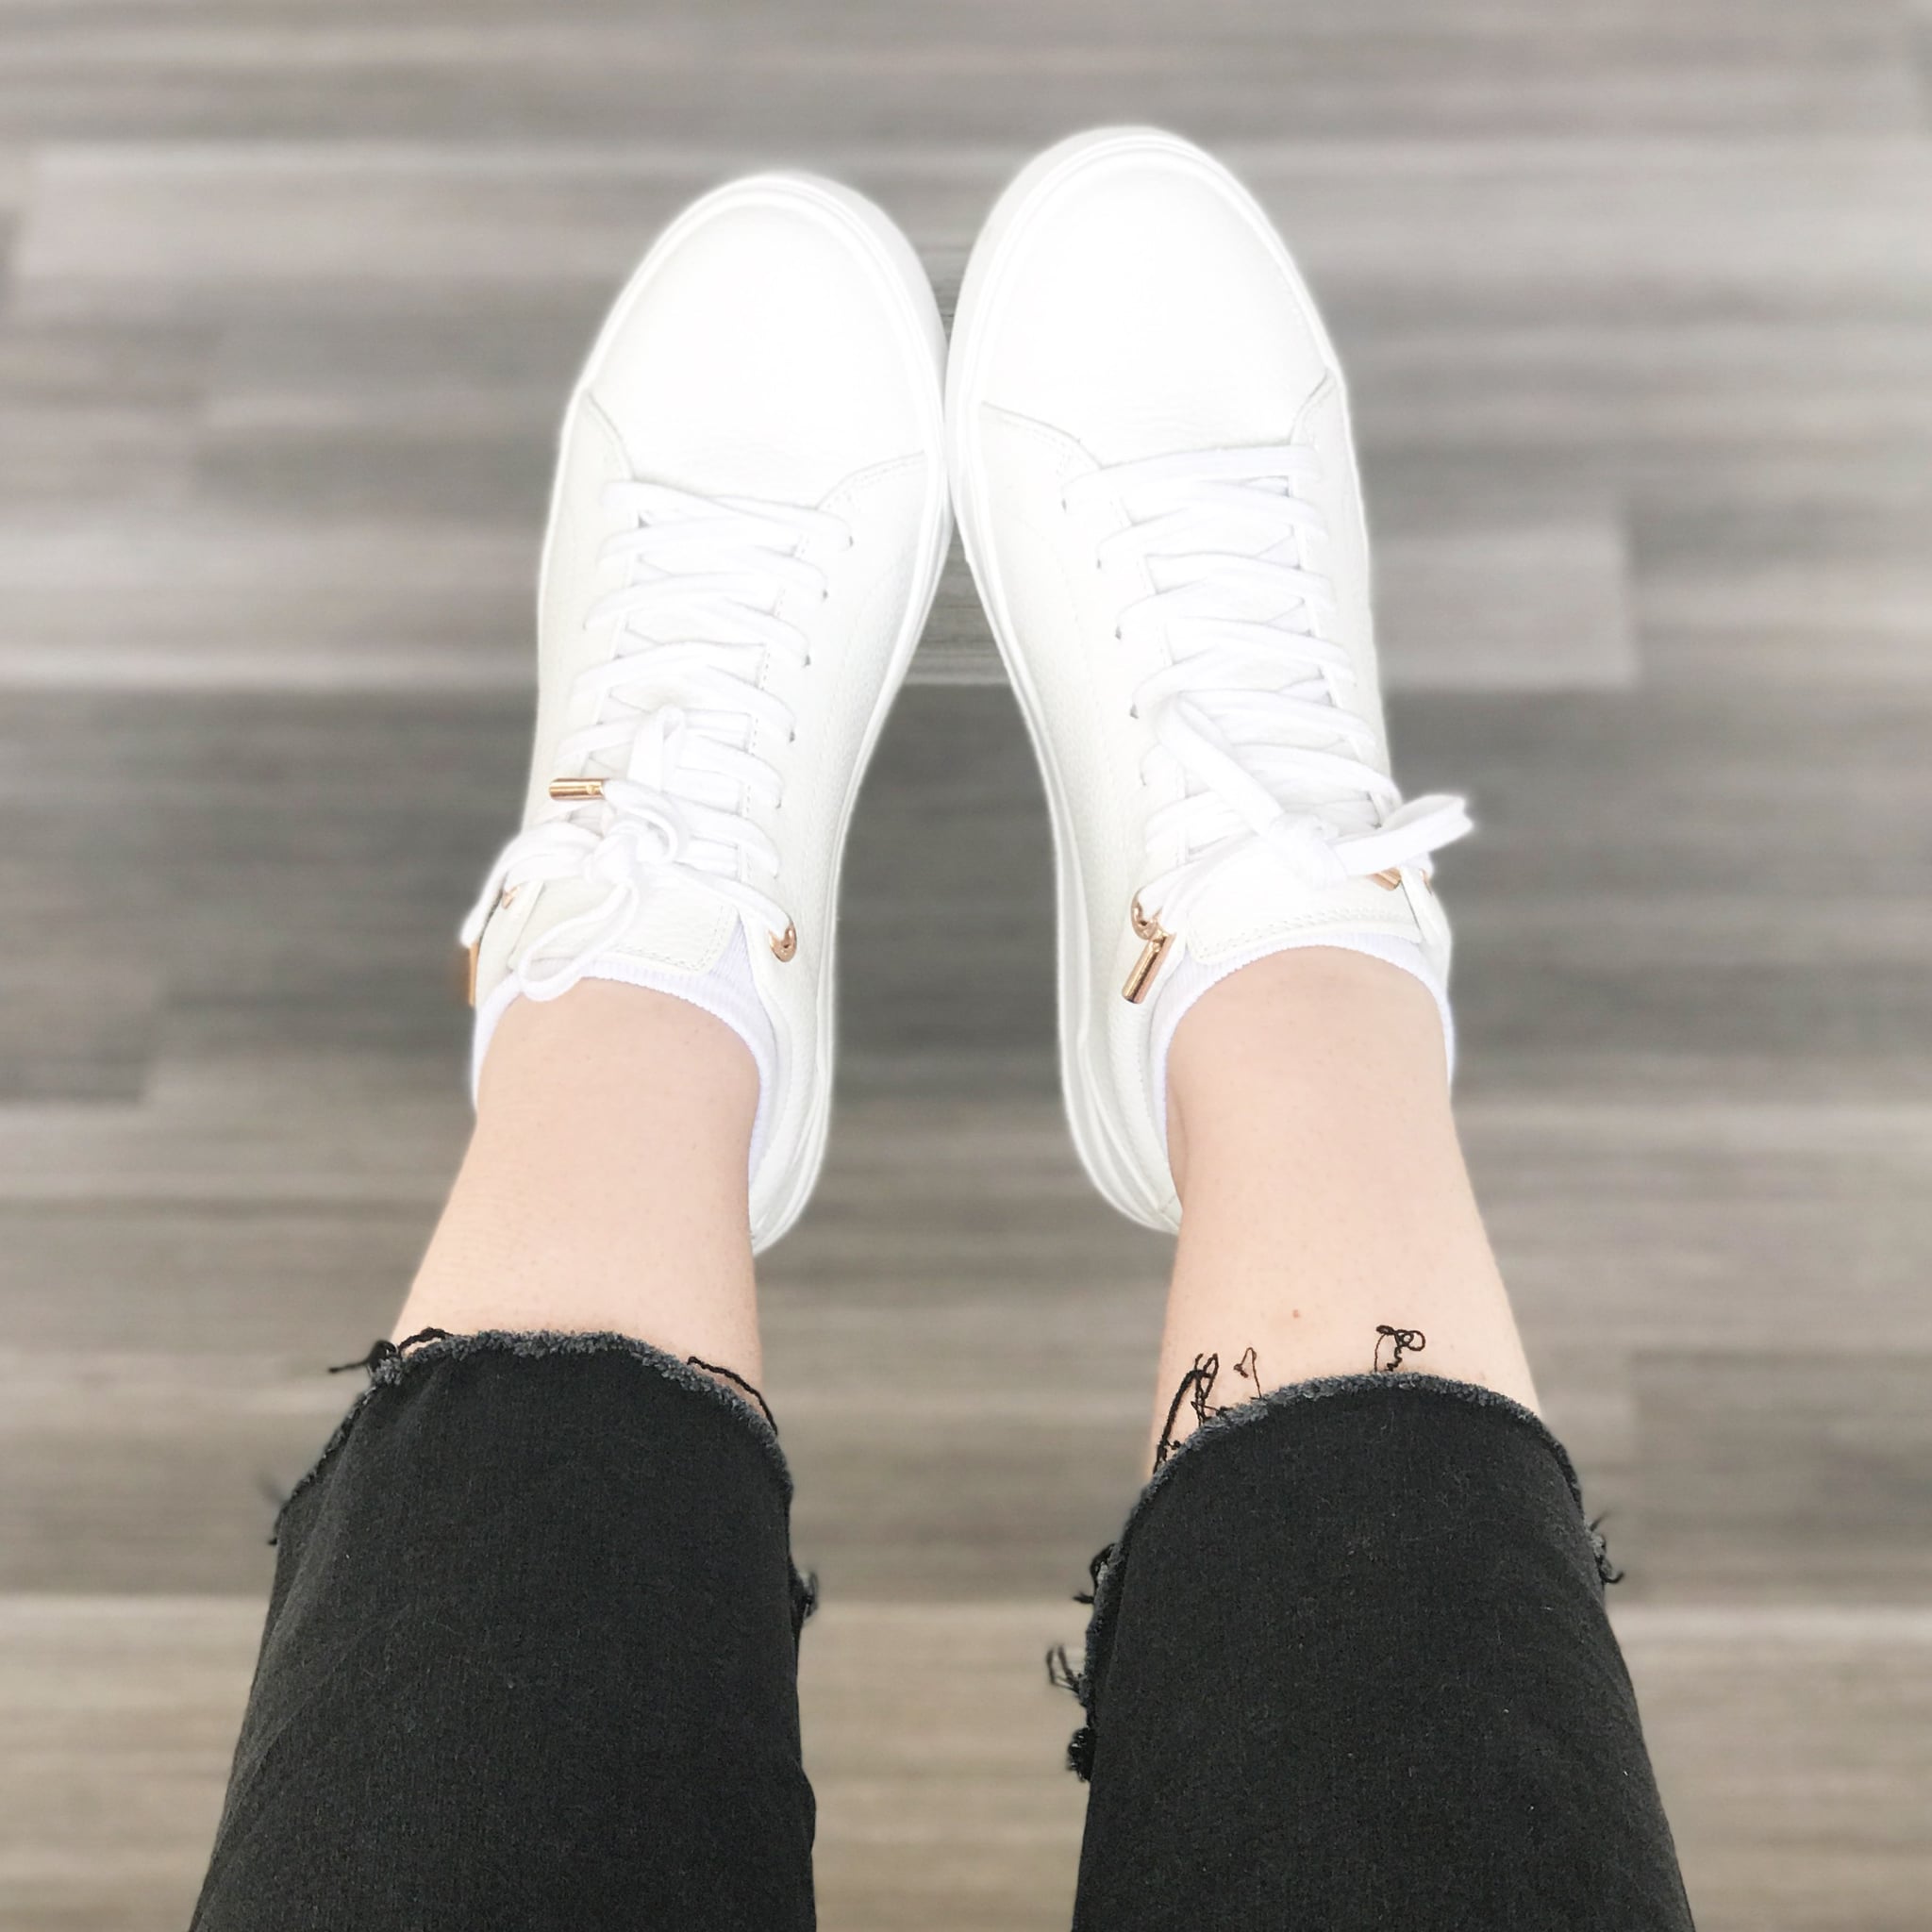 comfy cute white sneakers